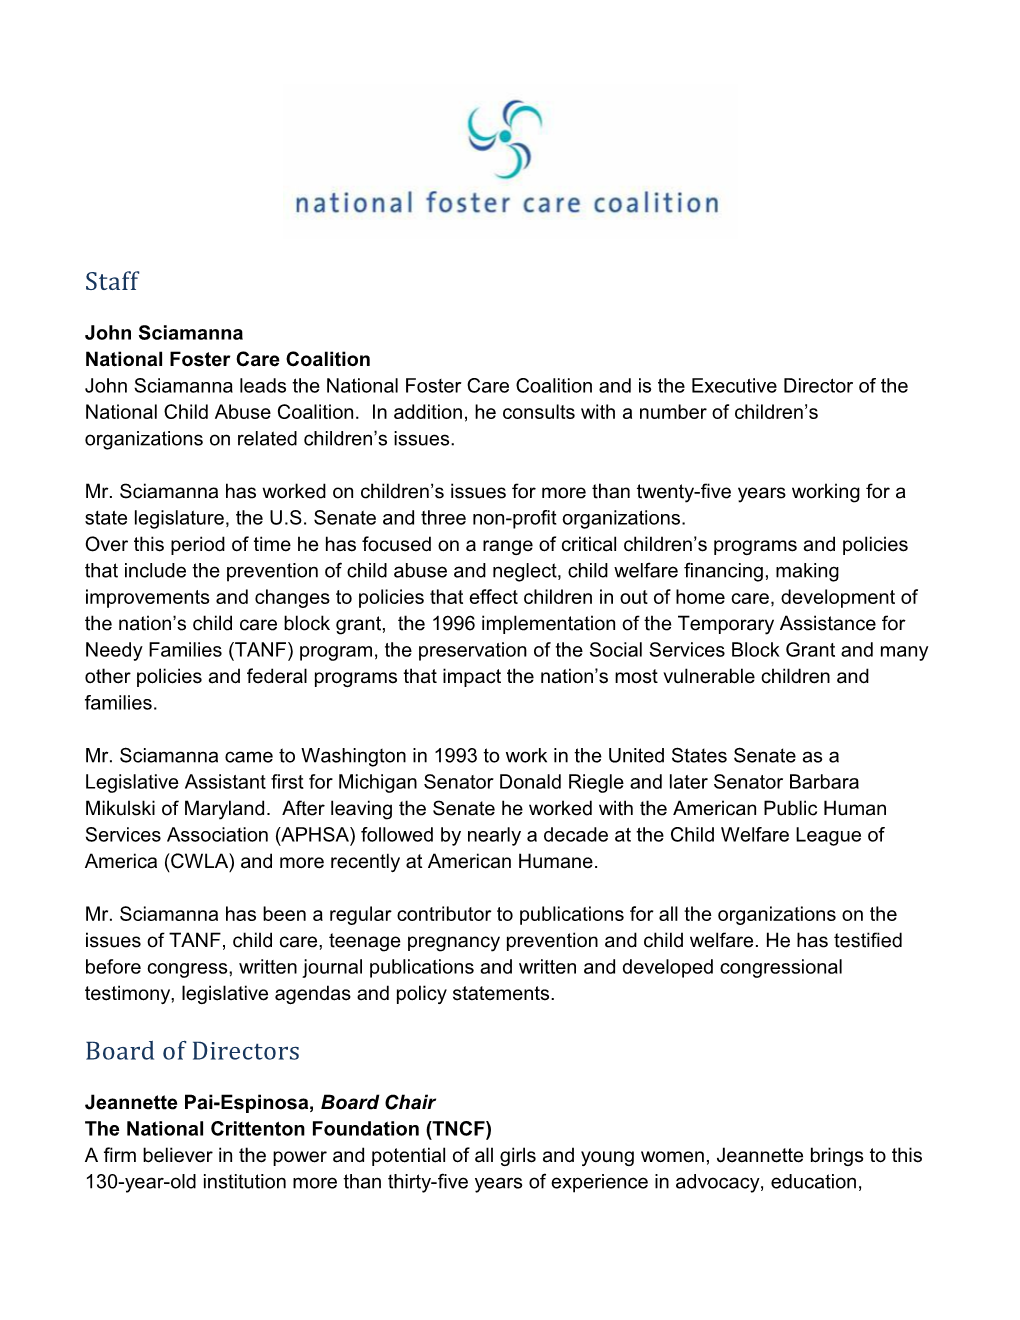 National Foster Care Coalition